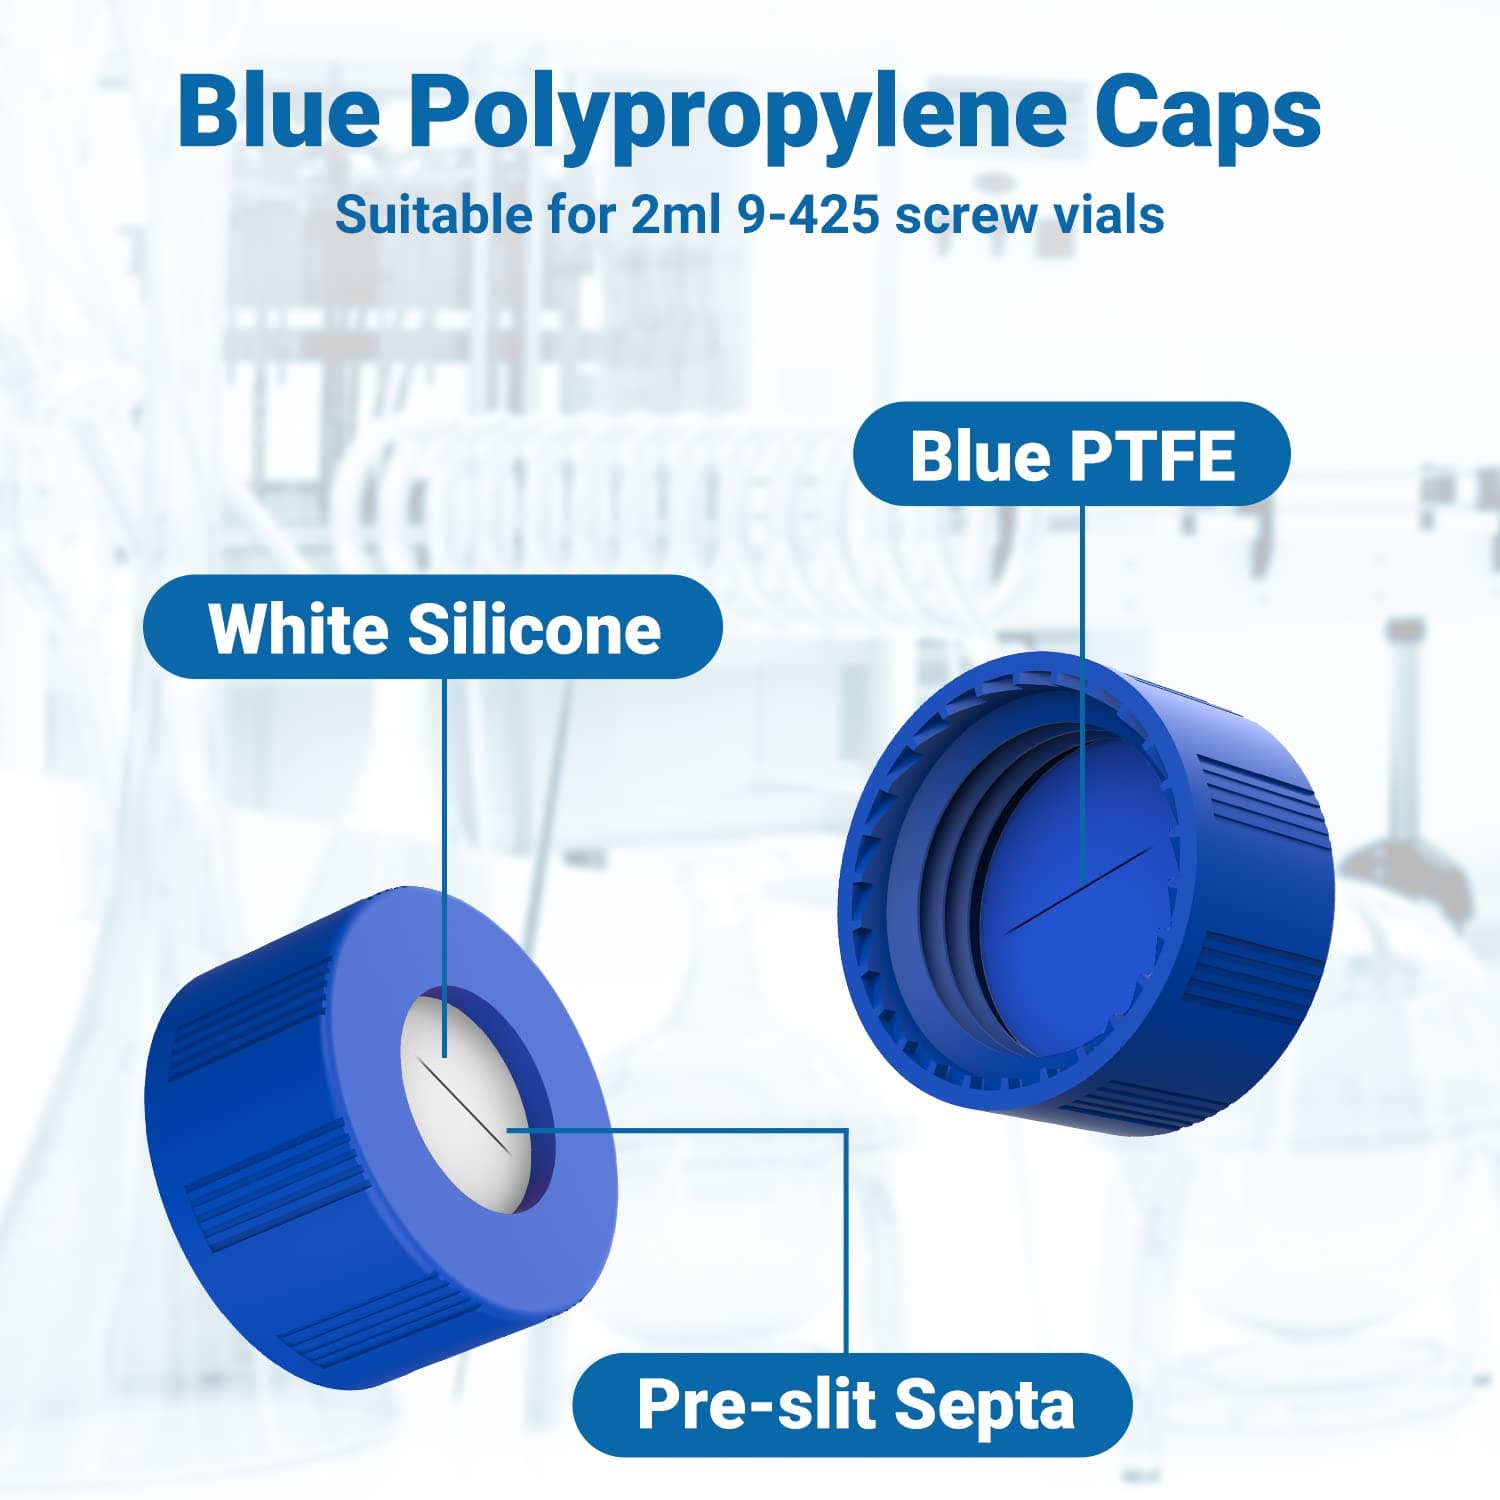 Pre-Slit White Silicone and Blue PTFE for 2ml 9-425 screw vials caps